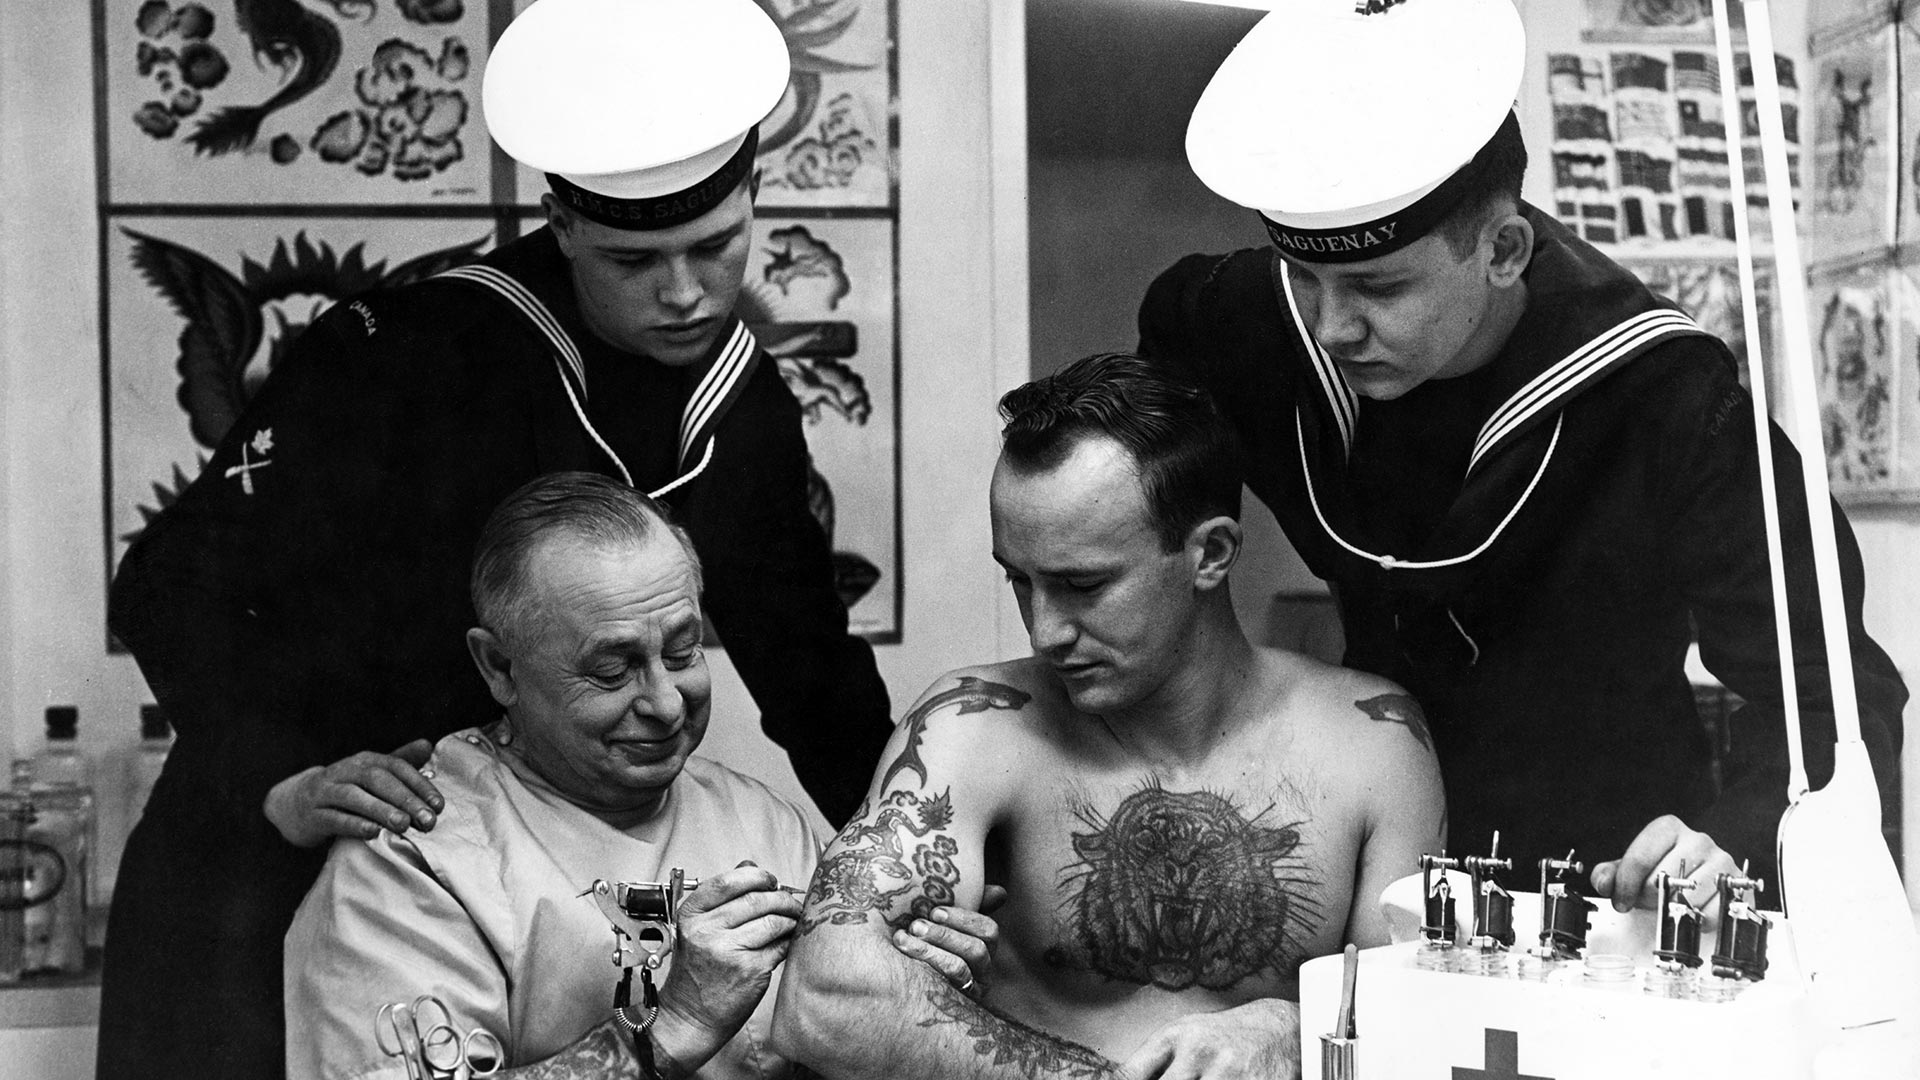 Therapy sailors are an essential part of the tattooing experience. Also available for parties! (Photo: Jim Ryan, Getty Images)